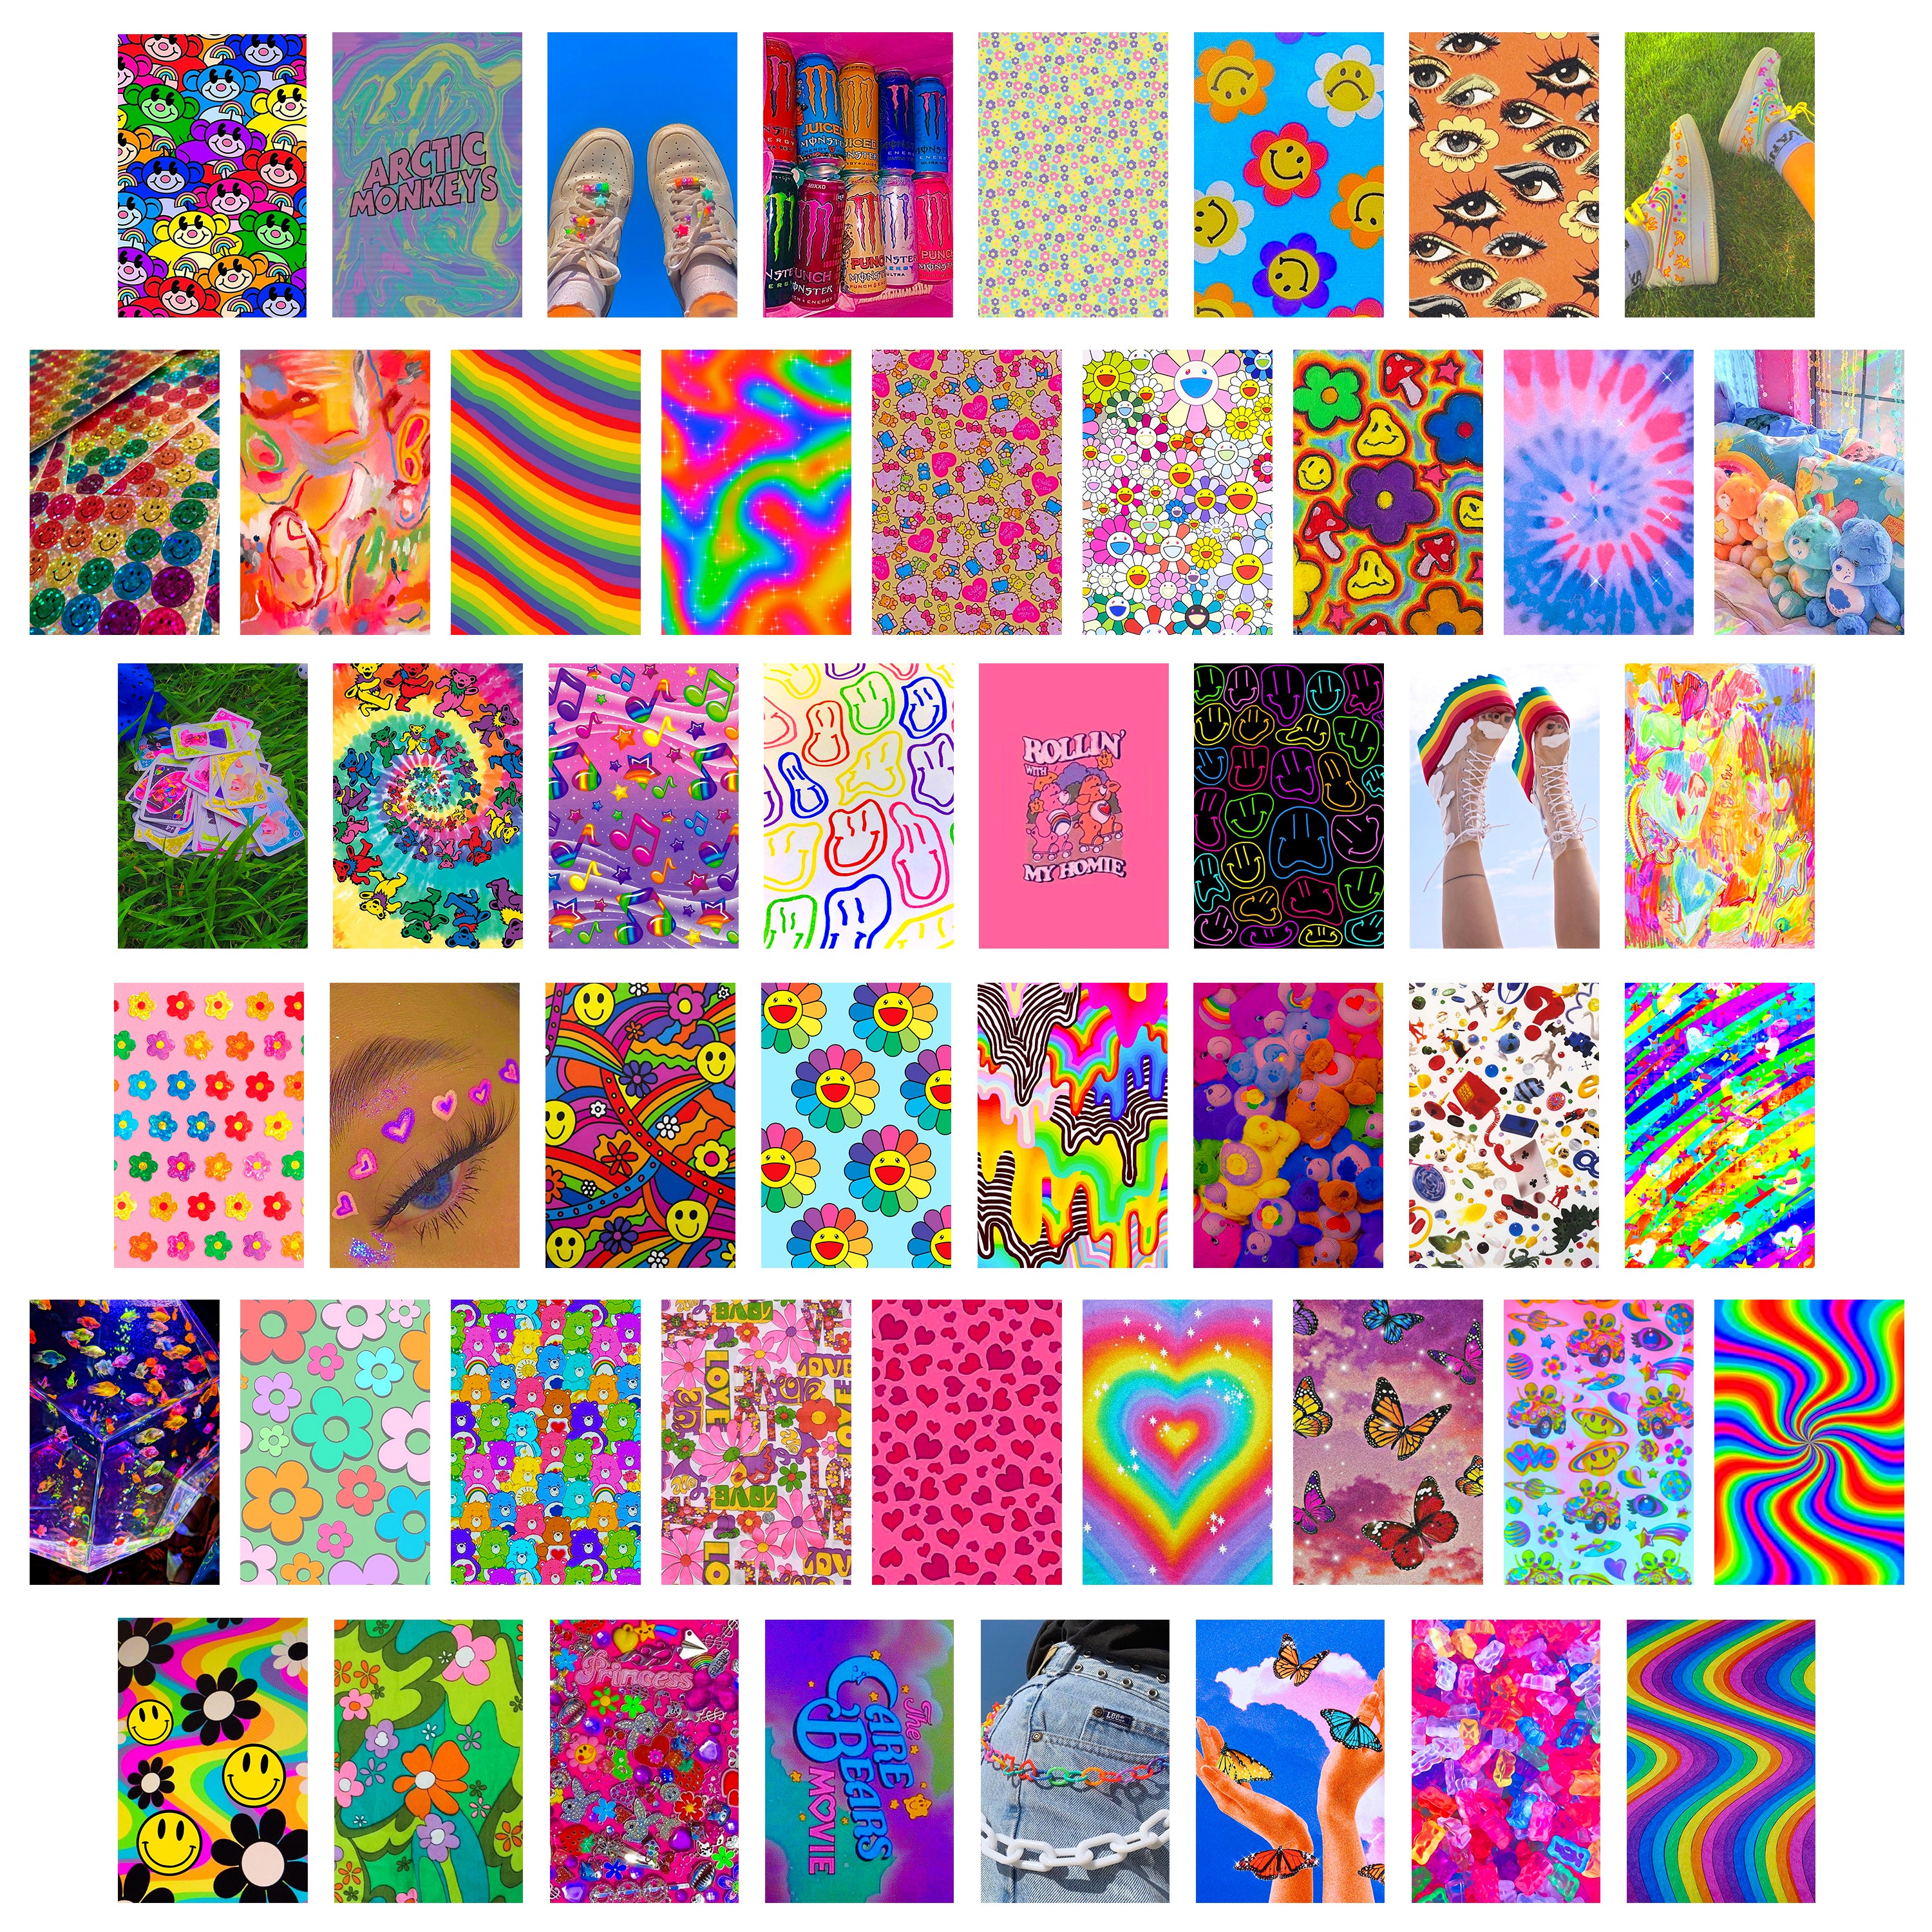 Indie Kidcore Hippie Aesthetic Wallpapers, 50 Set 4x6 inch, Wall Collage Indie, Colorful Room Decor for Girl